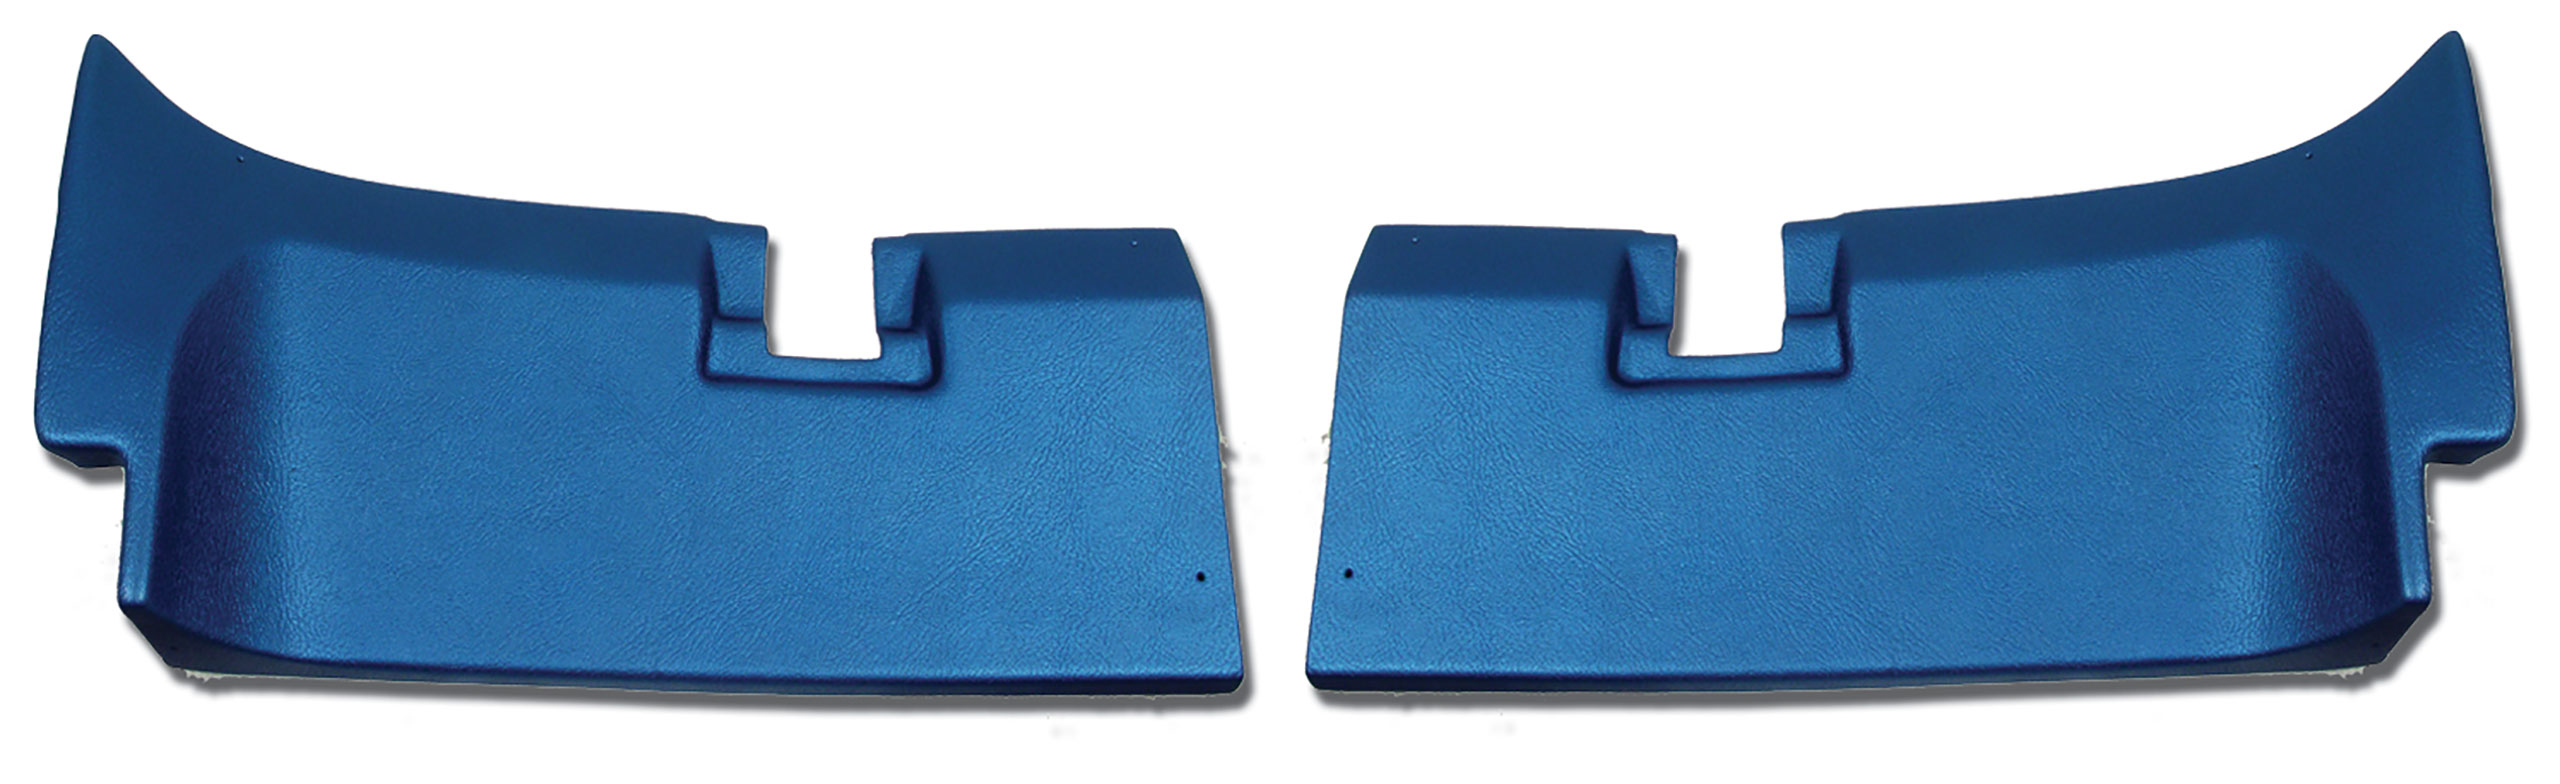 Rear Coupe Roof Panels- Bright Blue For 1969-1970 Corvette